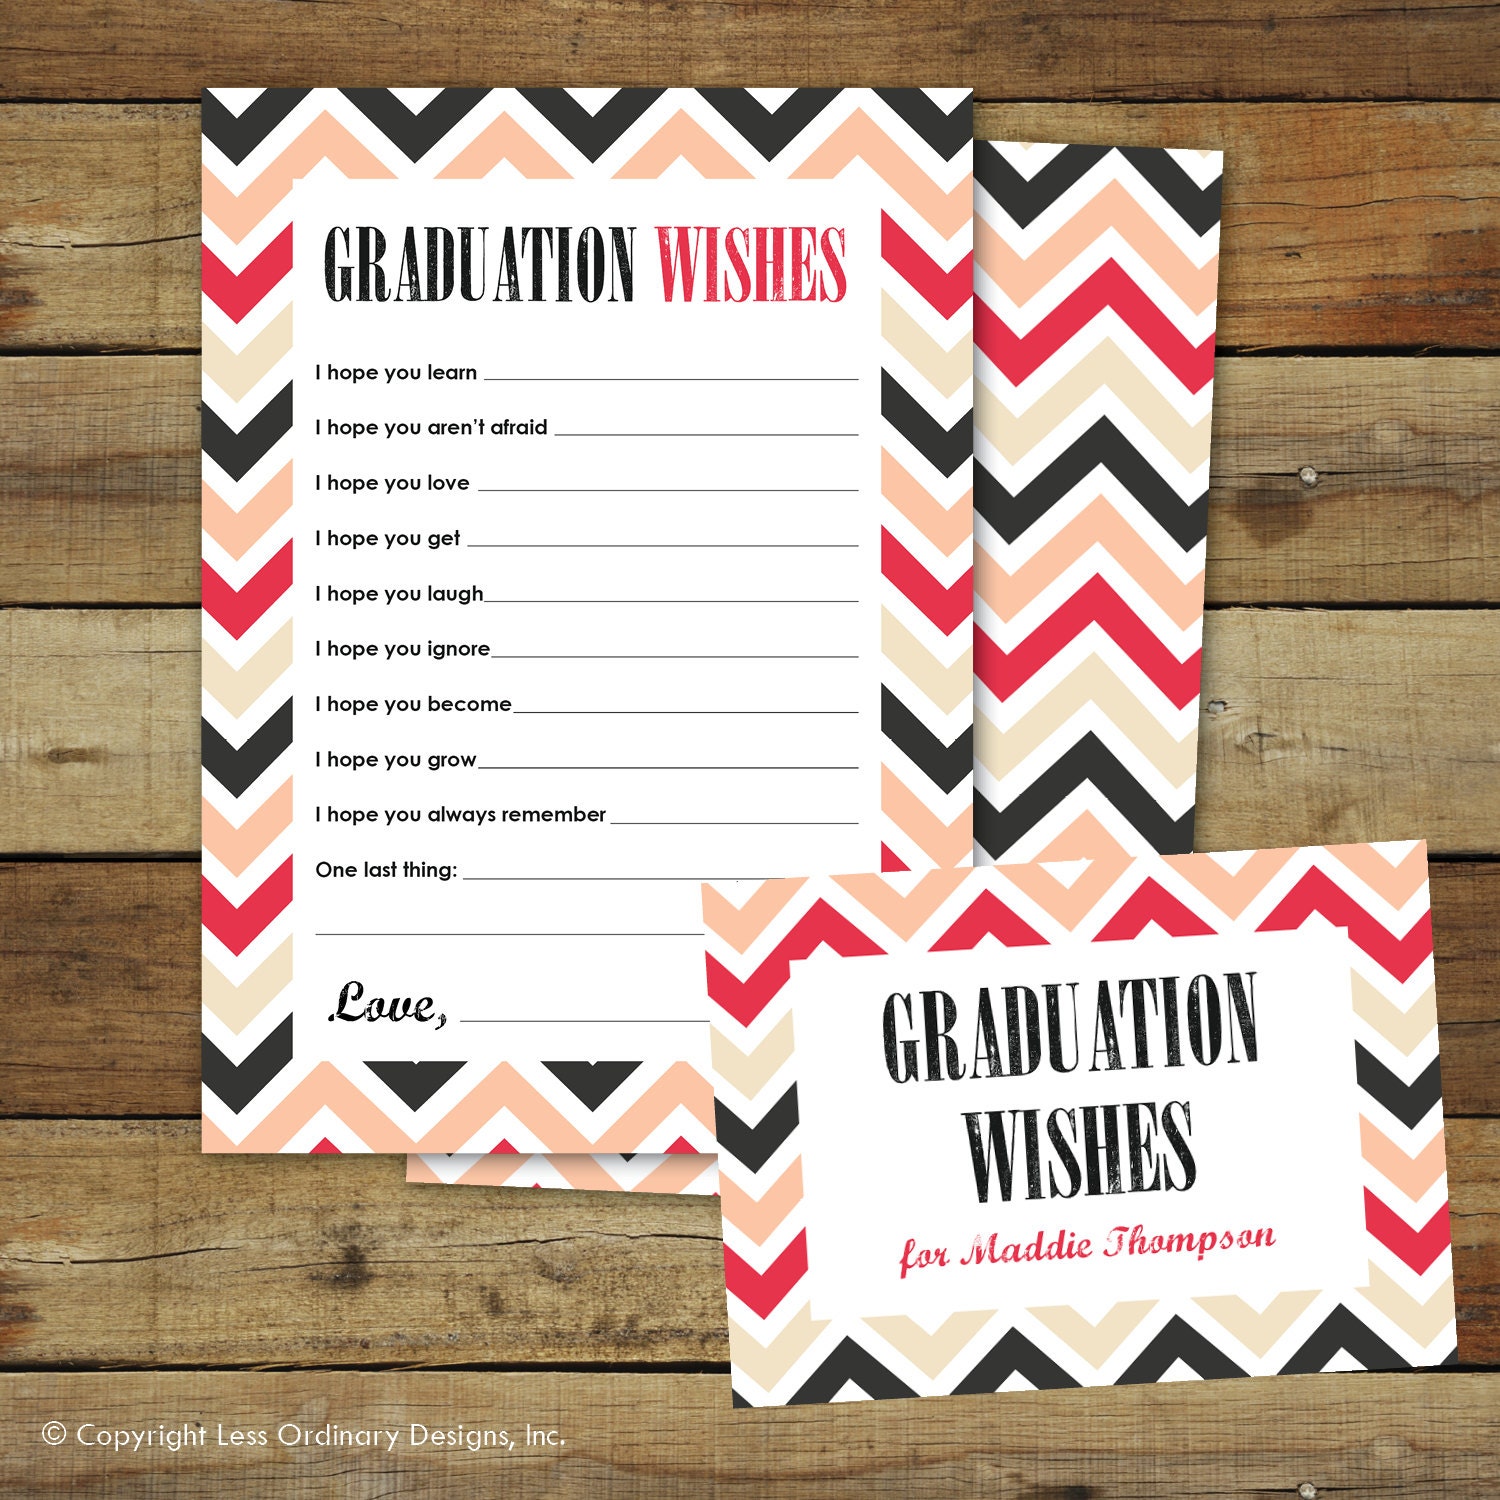 Graduation wishes advice cards instant download editable